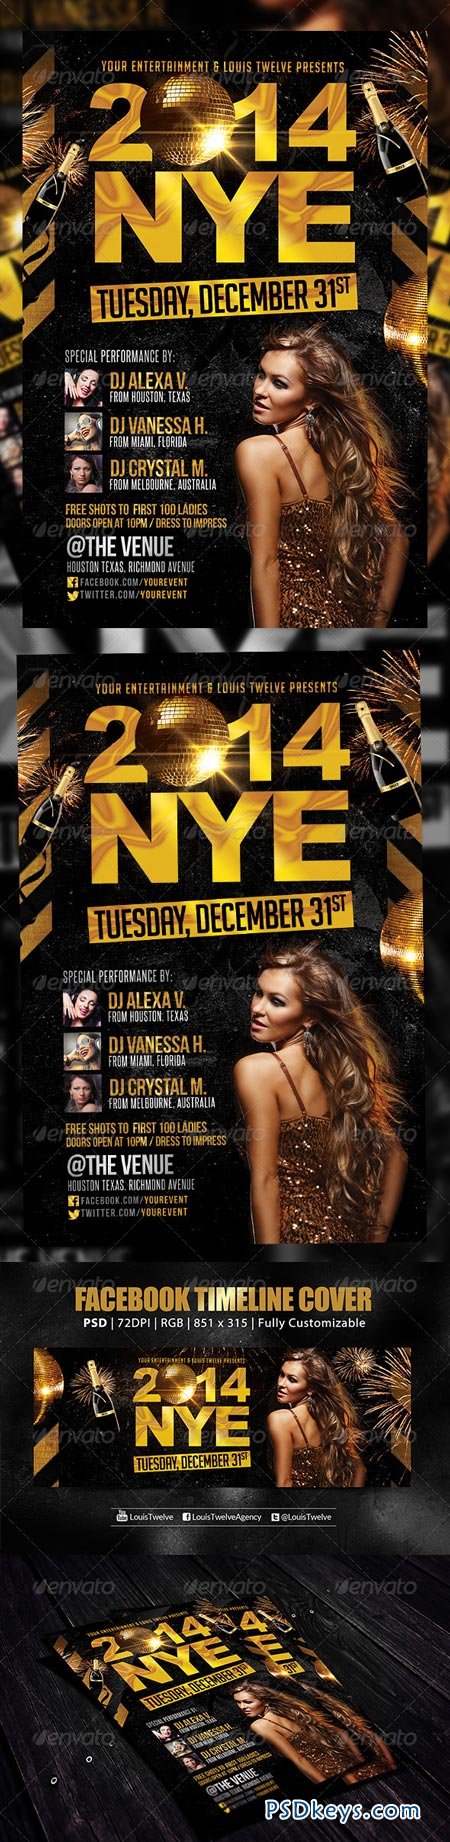 NYE Party Flyer + FB Cover 6125901